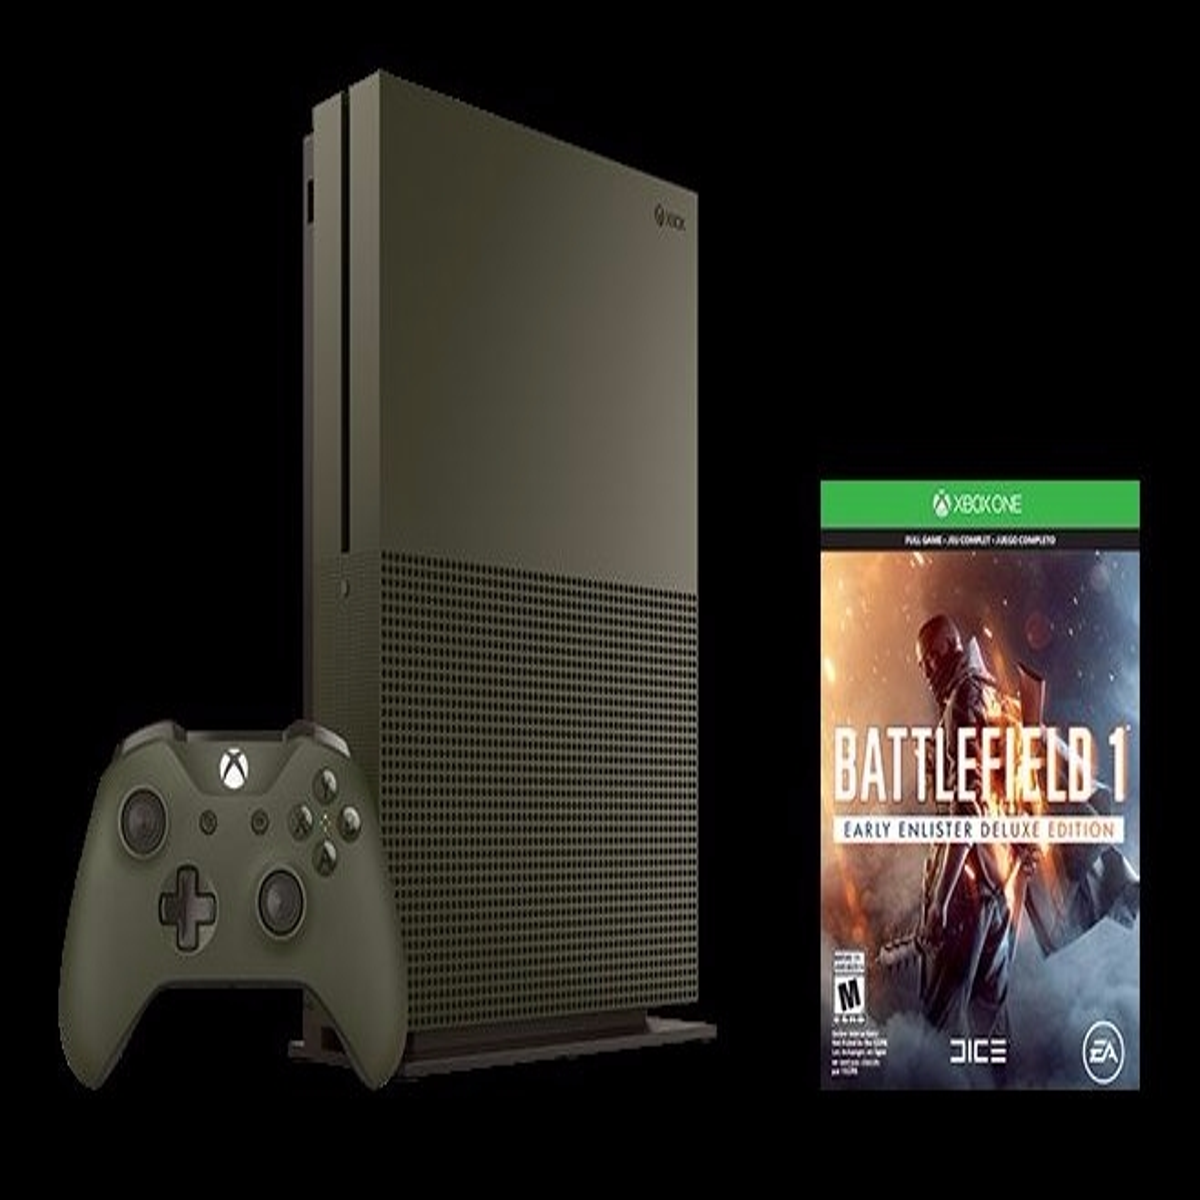 Xbox One S Battlefield 1 bundle announced, along with special edition  console